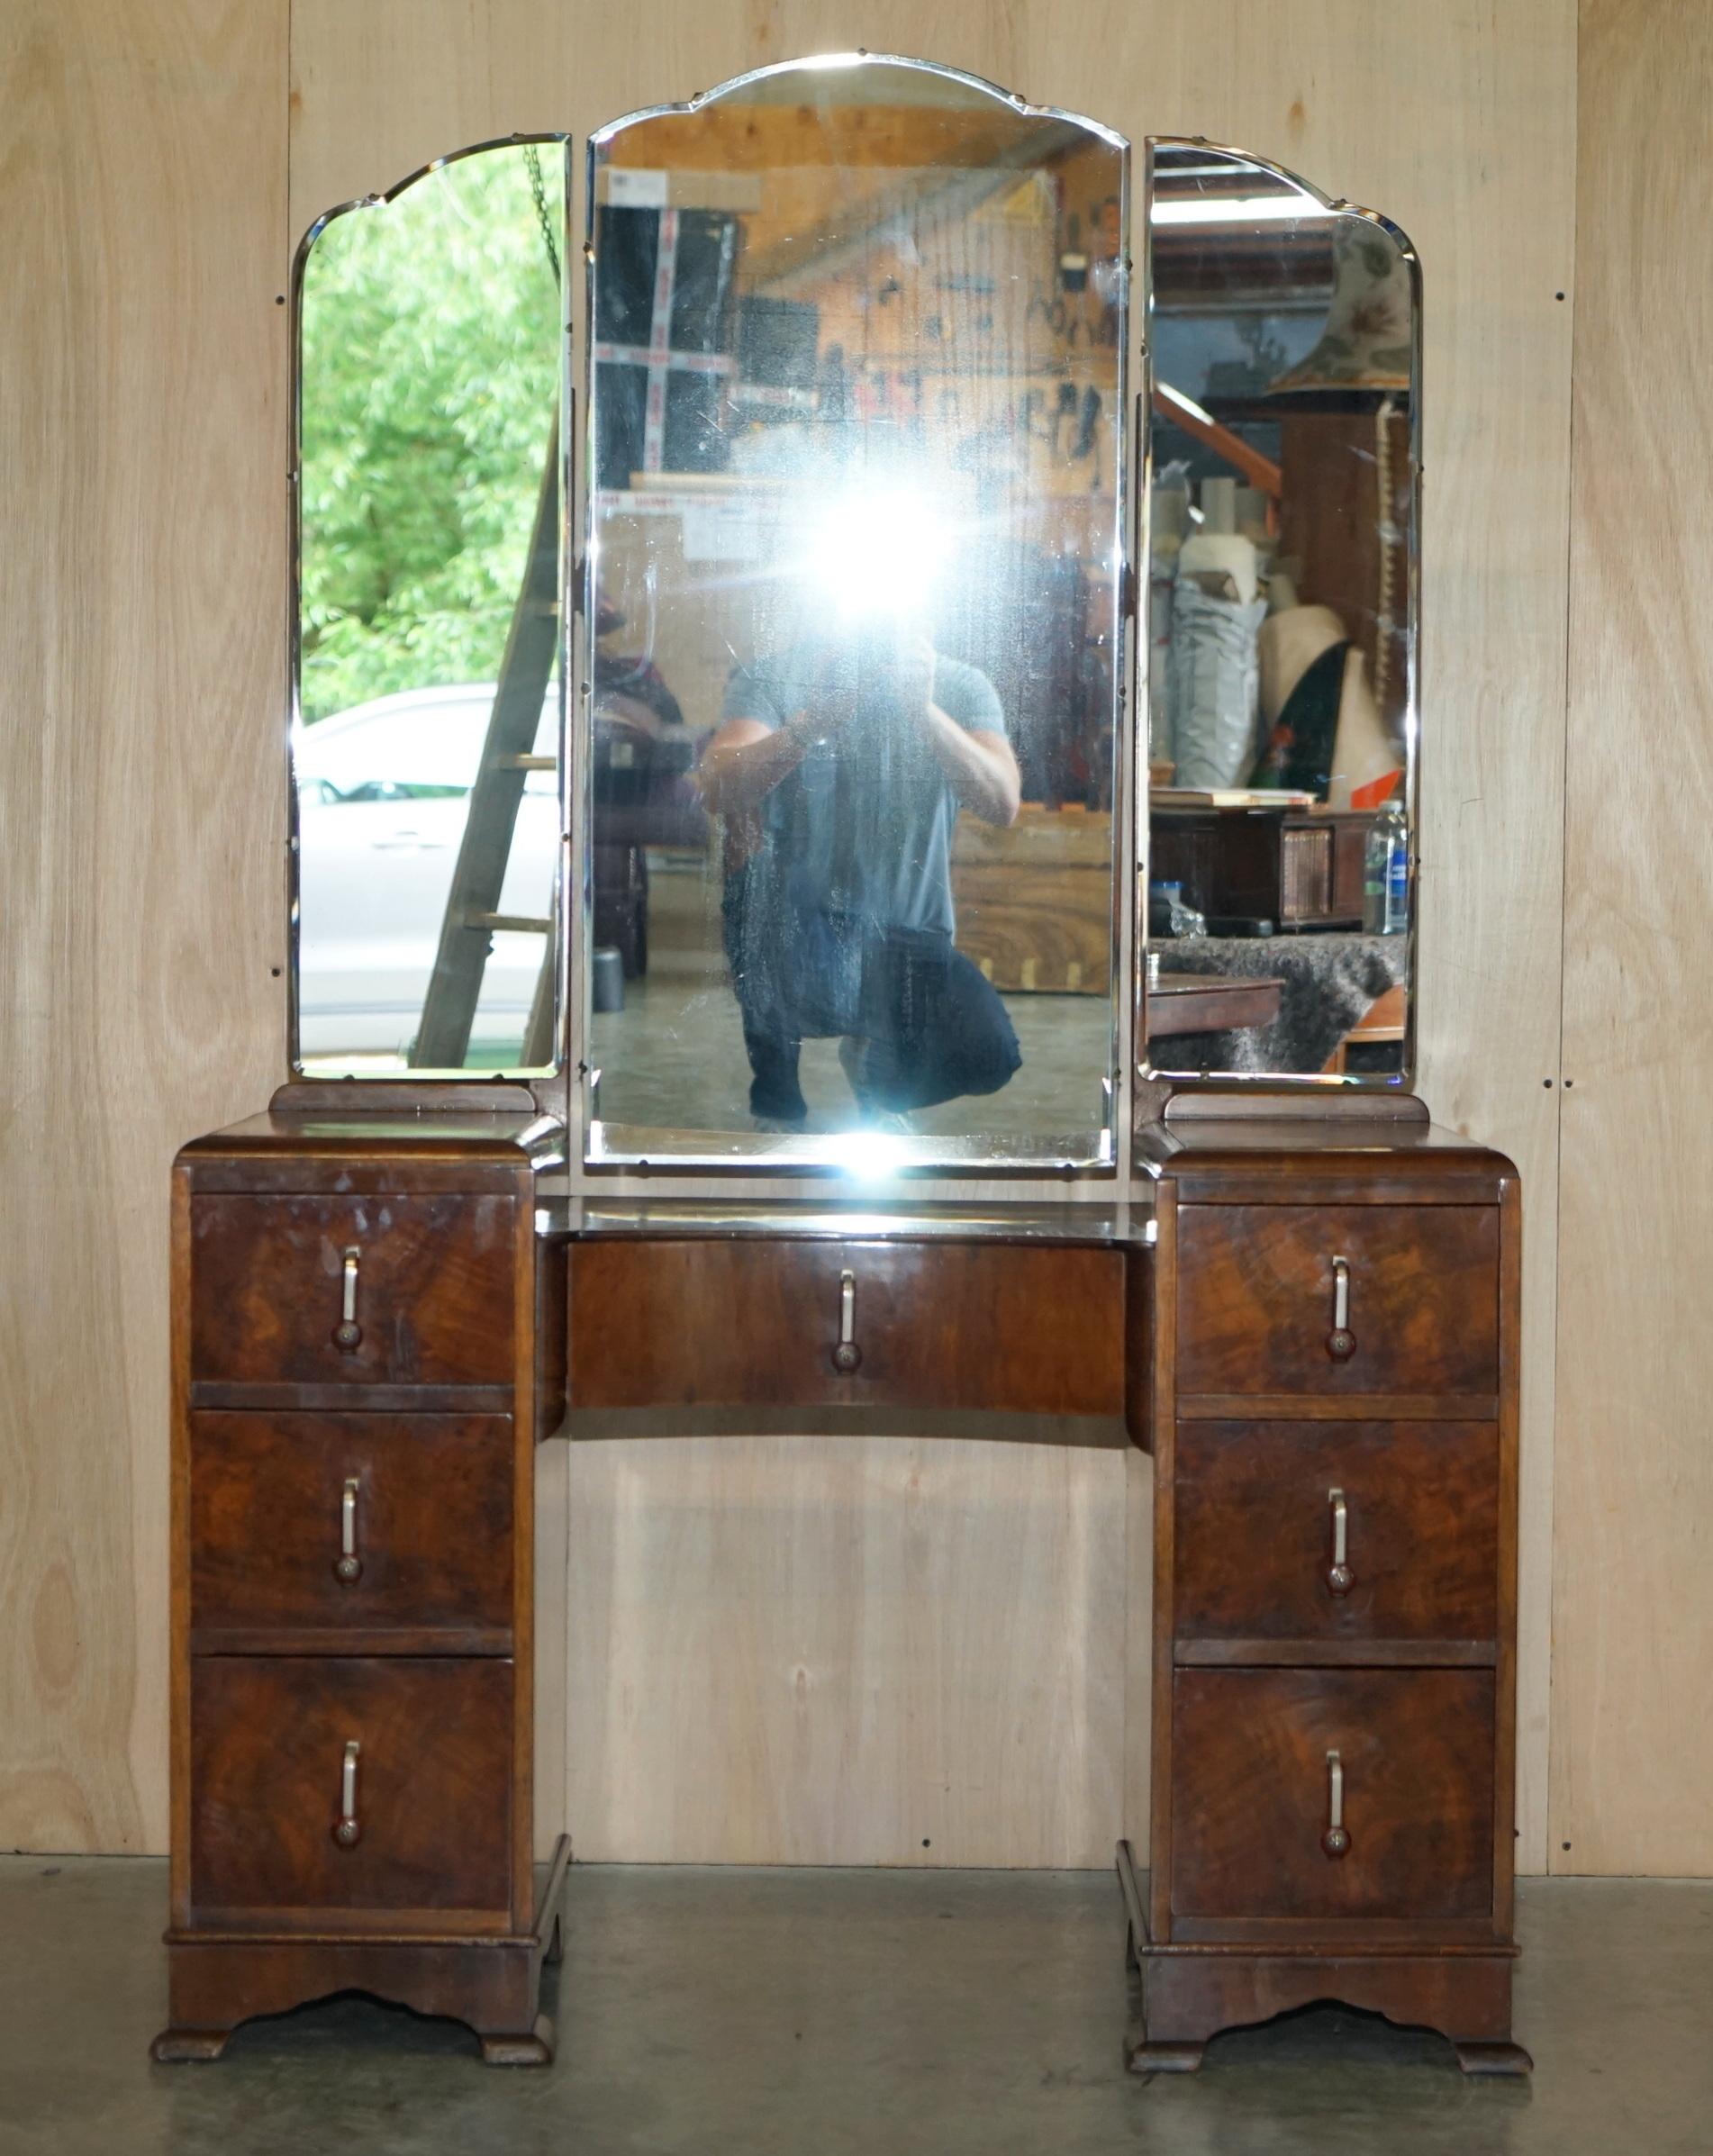 We are delighted to offer for sale this stunning, original circa 1920’s Art Deco dressing table with trifold mirrors which is part of a suite.

As mentioned this piece is part of a suite, in total I have a his and hers pair of wardrobes, the